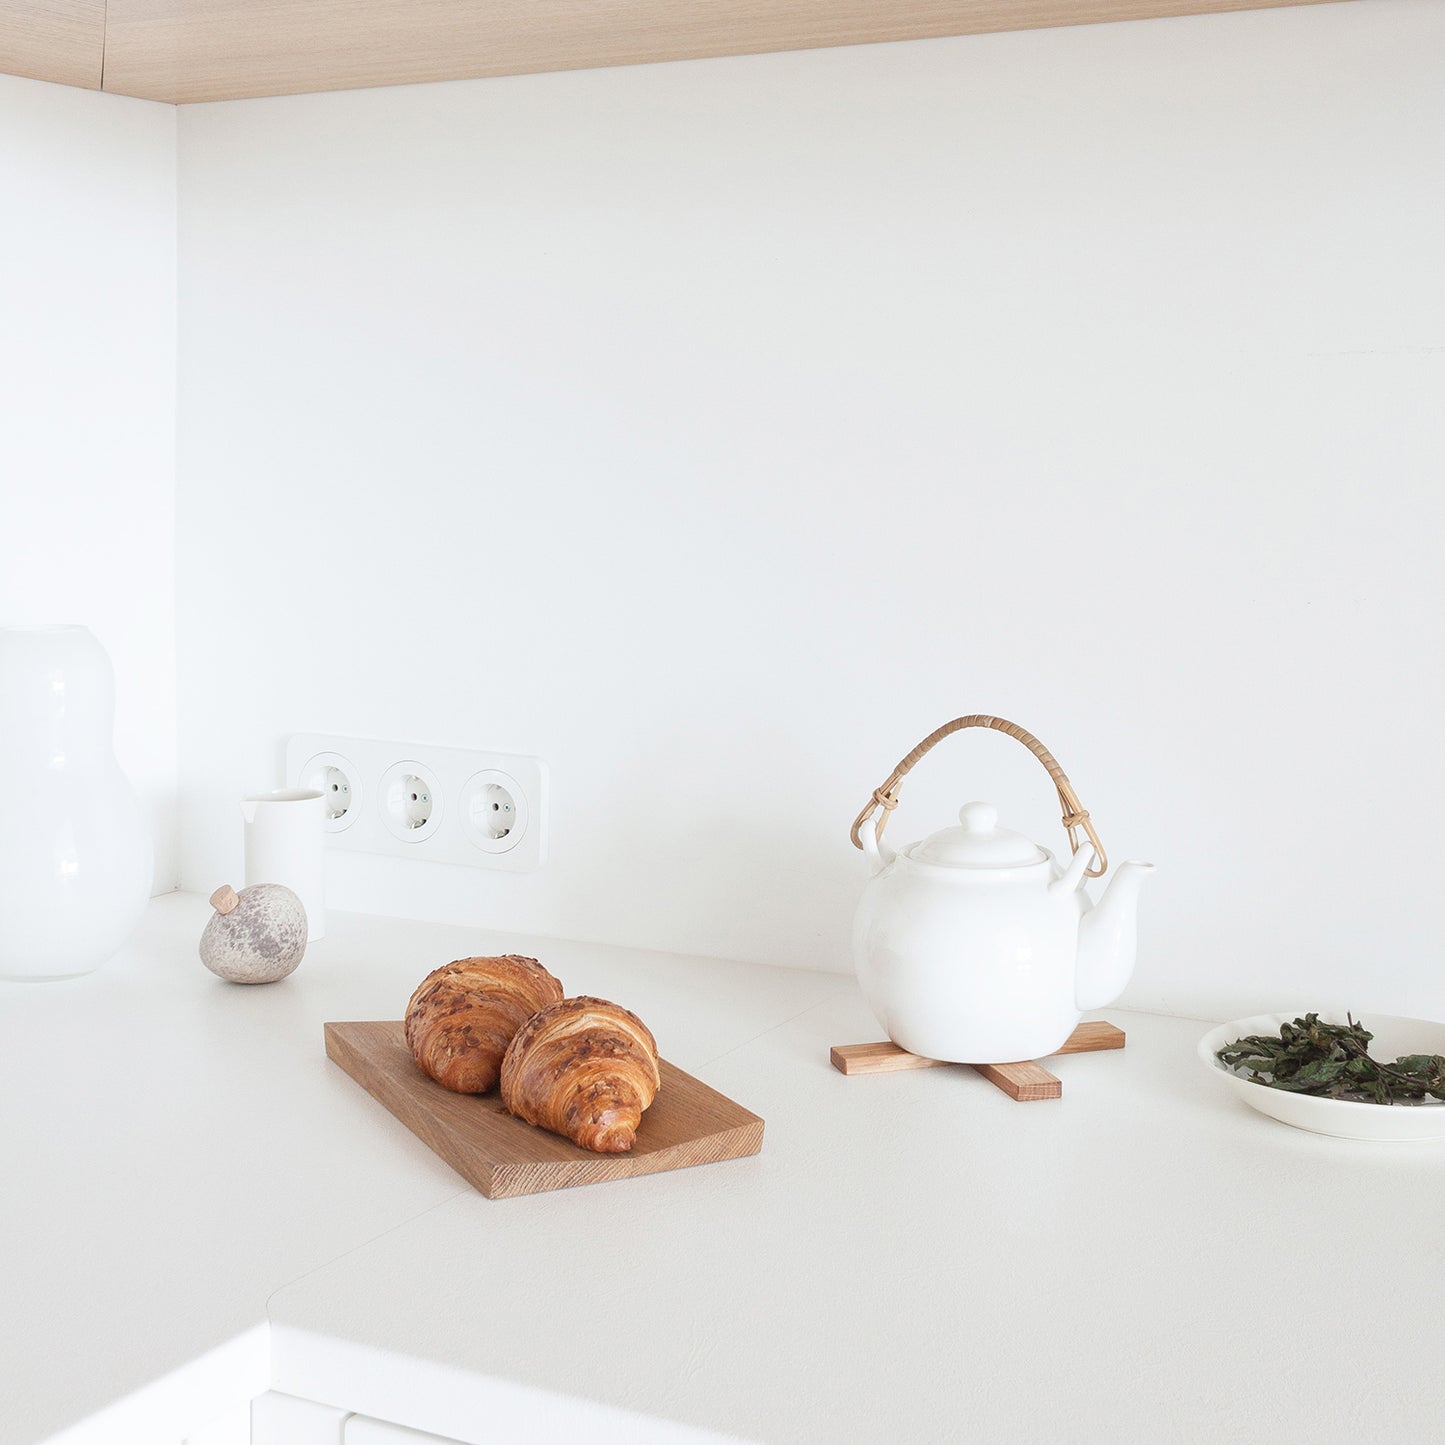 Minumo pliks-plaks trivet and fold serving board in white kitchen in scandinavian style home with a timeless nordic design